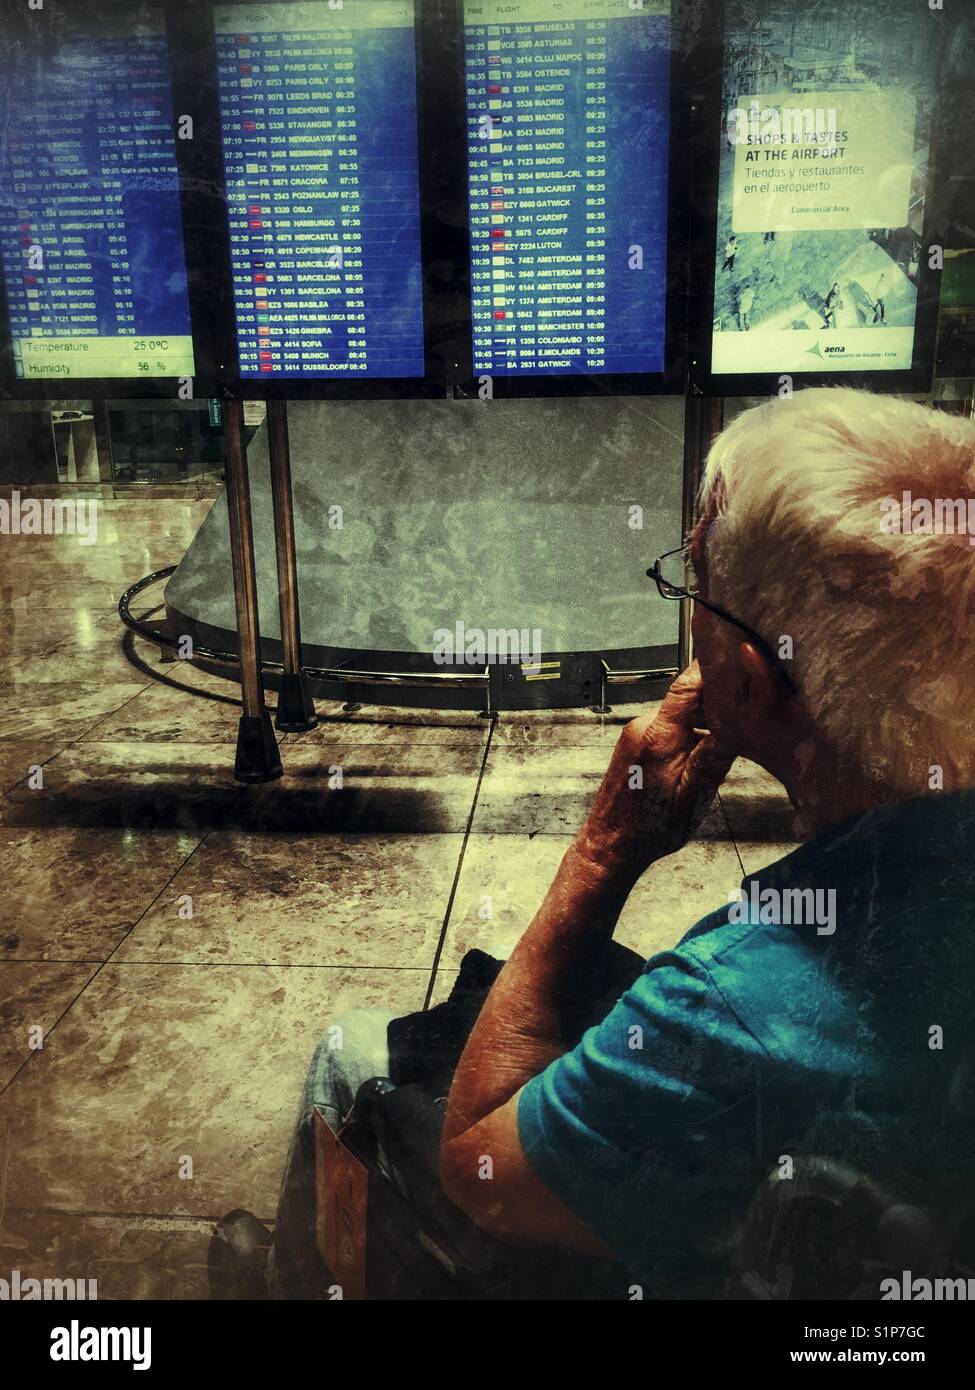 Senior man in a wheelchair, looking at the departure board at night, flight delayed. El Altet airport, Alicante, Spain Stock Photo